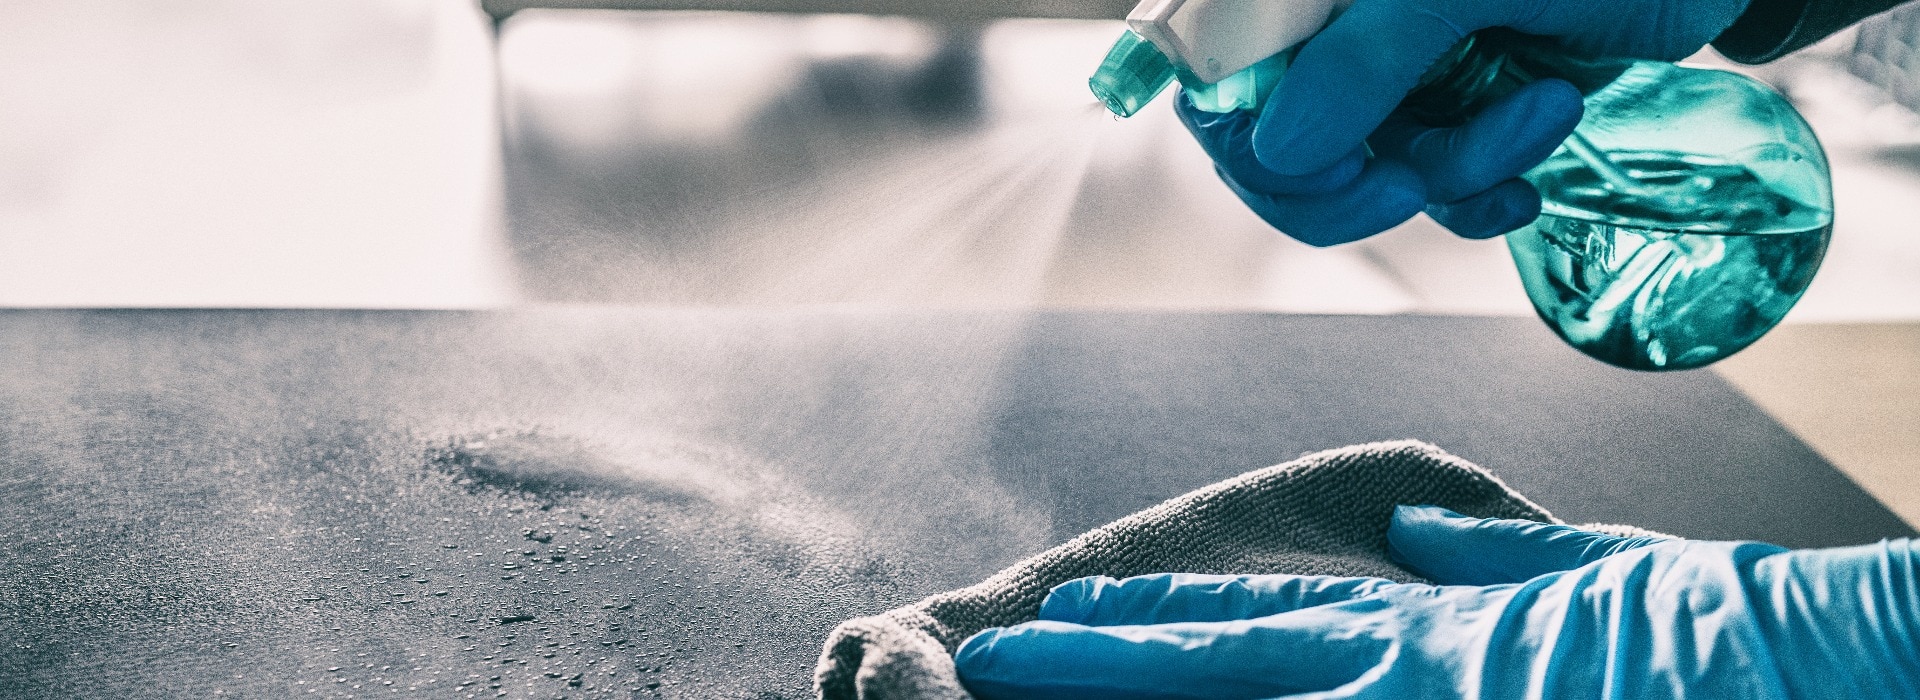 Surface sanitizing against COVID-19 outbreak. Home cleaning spraying antibacterial spray bottle disinfecting against coronavirus wearing nitrile gloves. Sanitize hospital surfaces prevention.